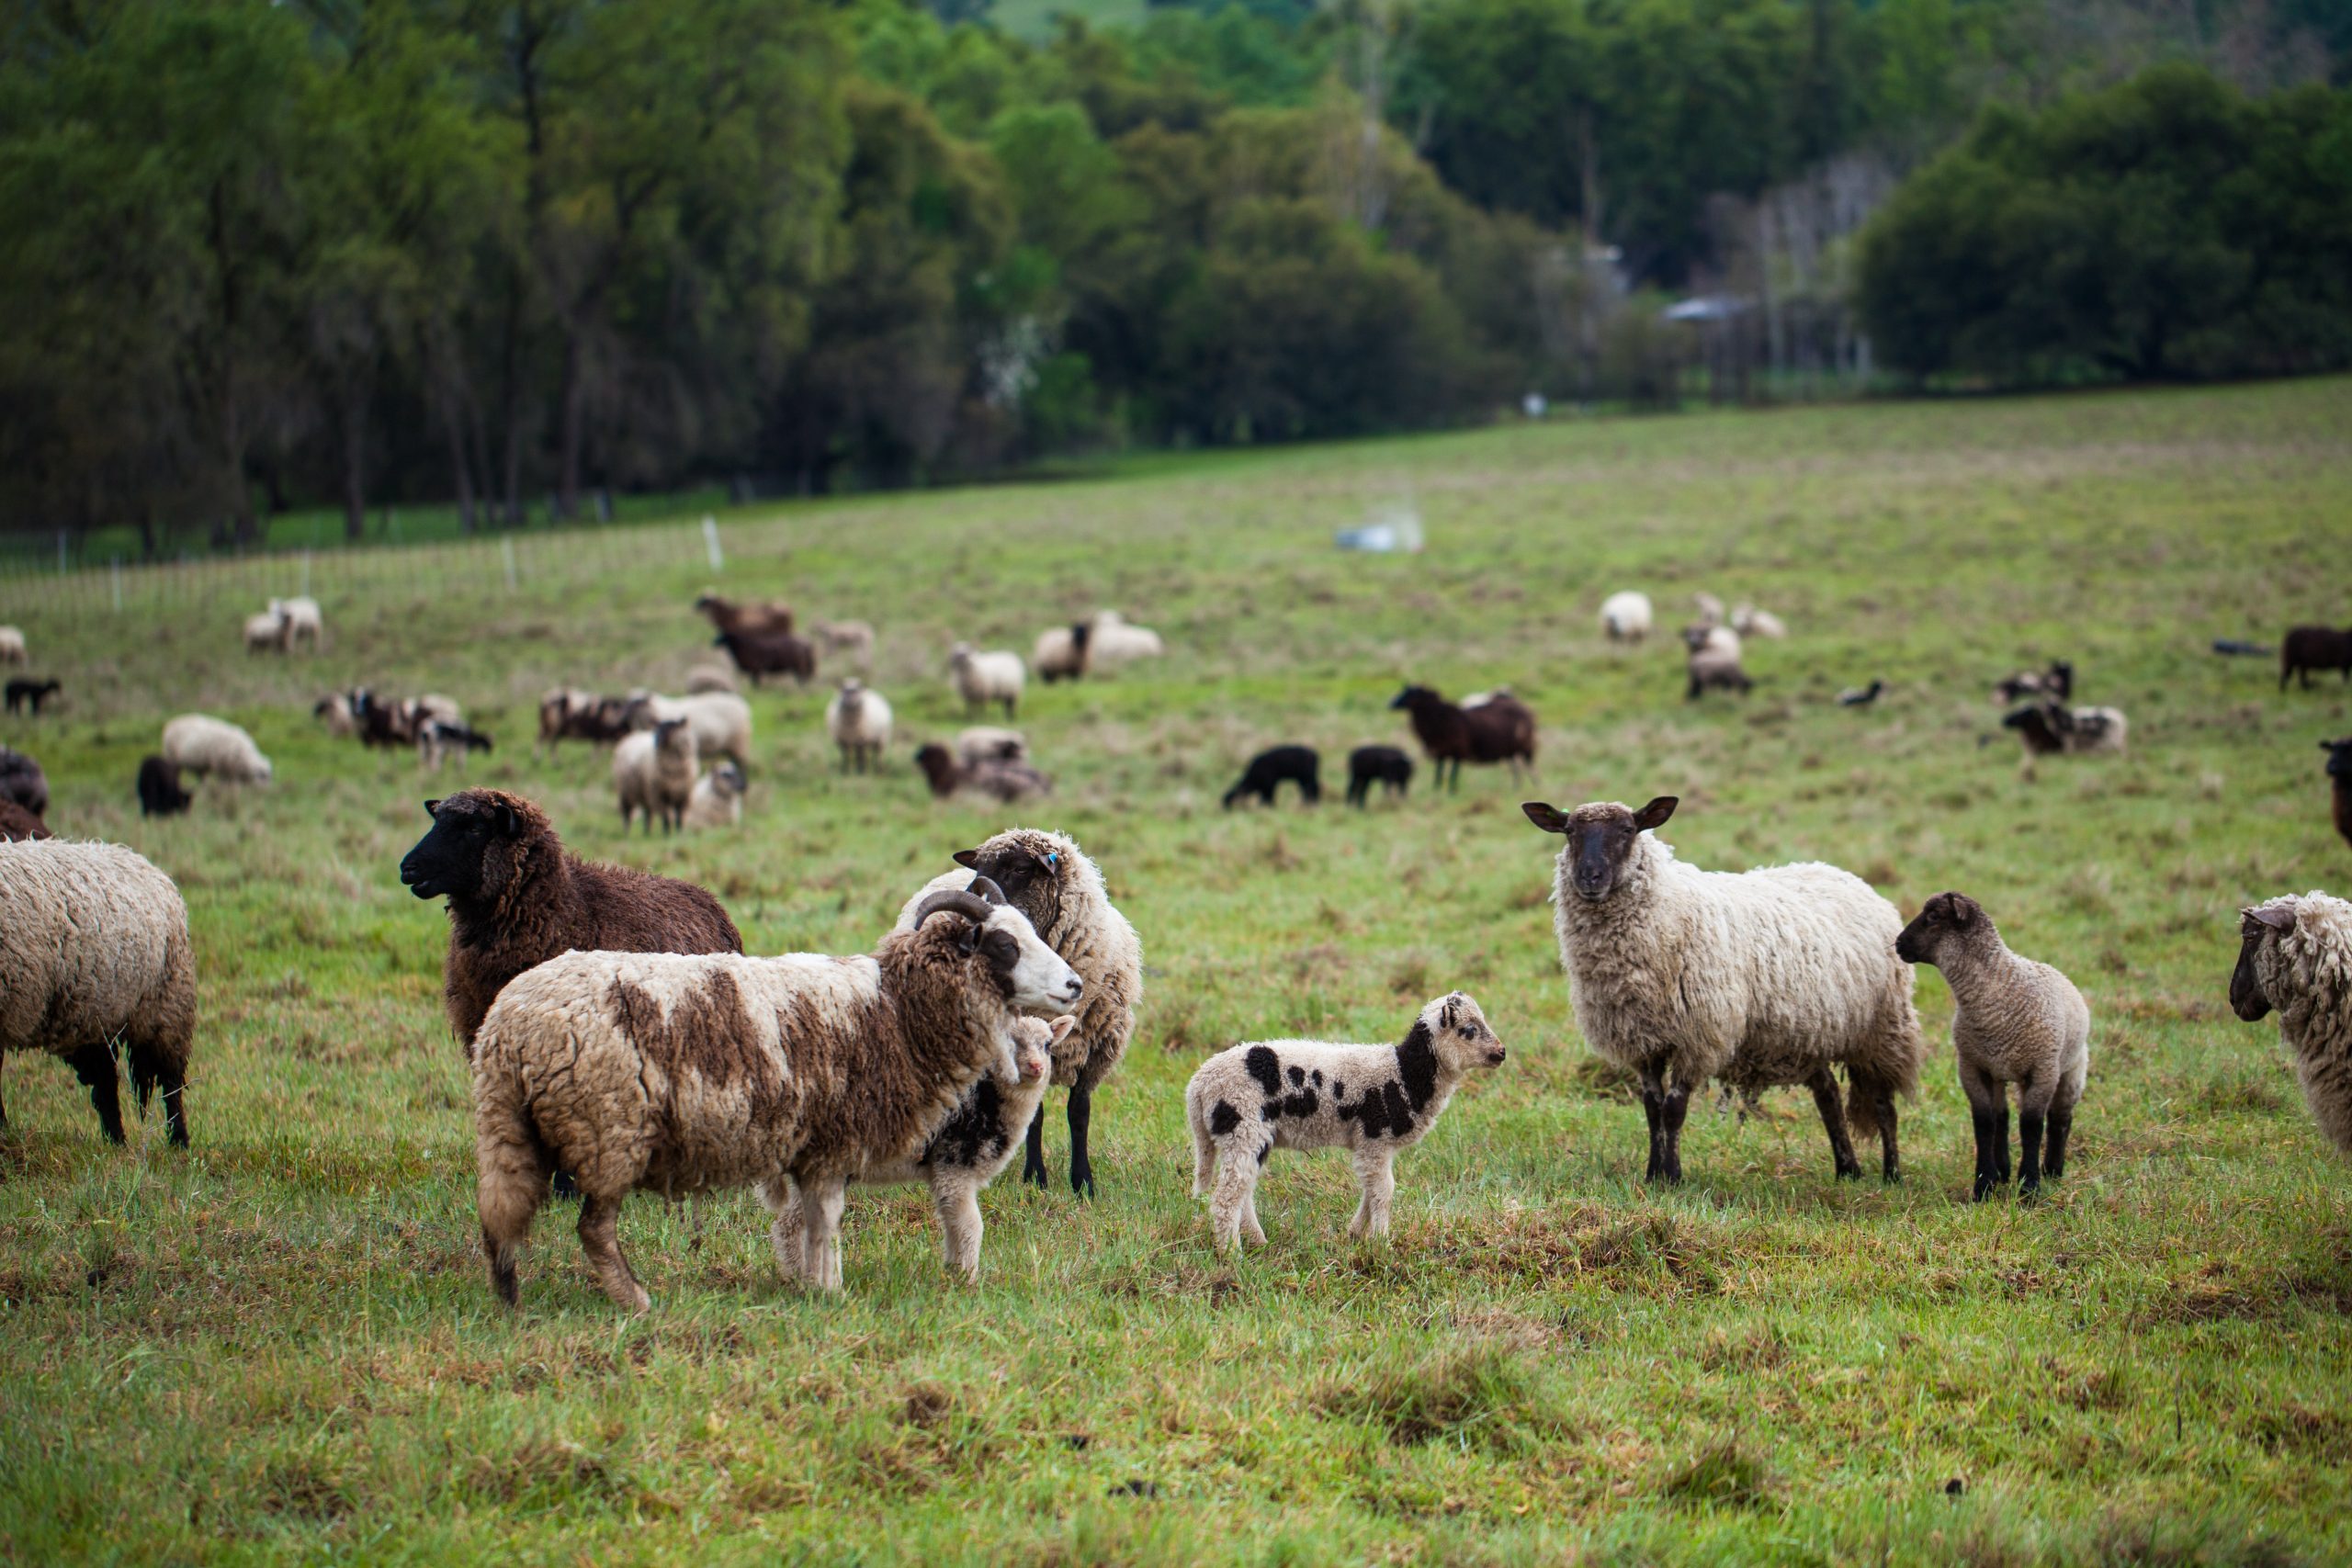 photograph of black and white herd of sheep in a verdant green pasture